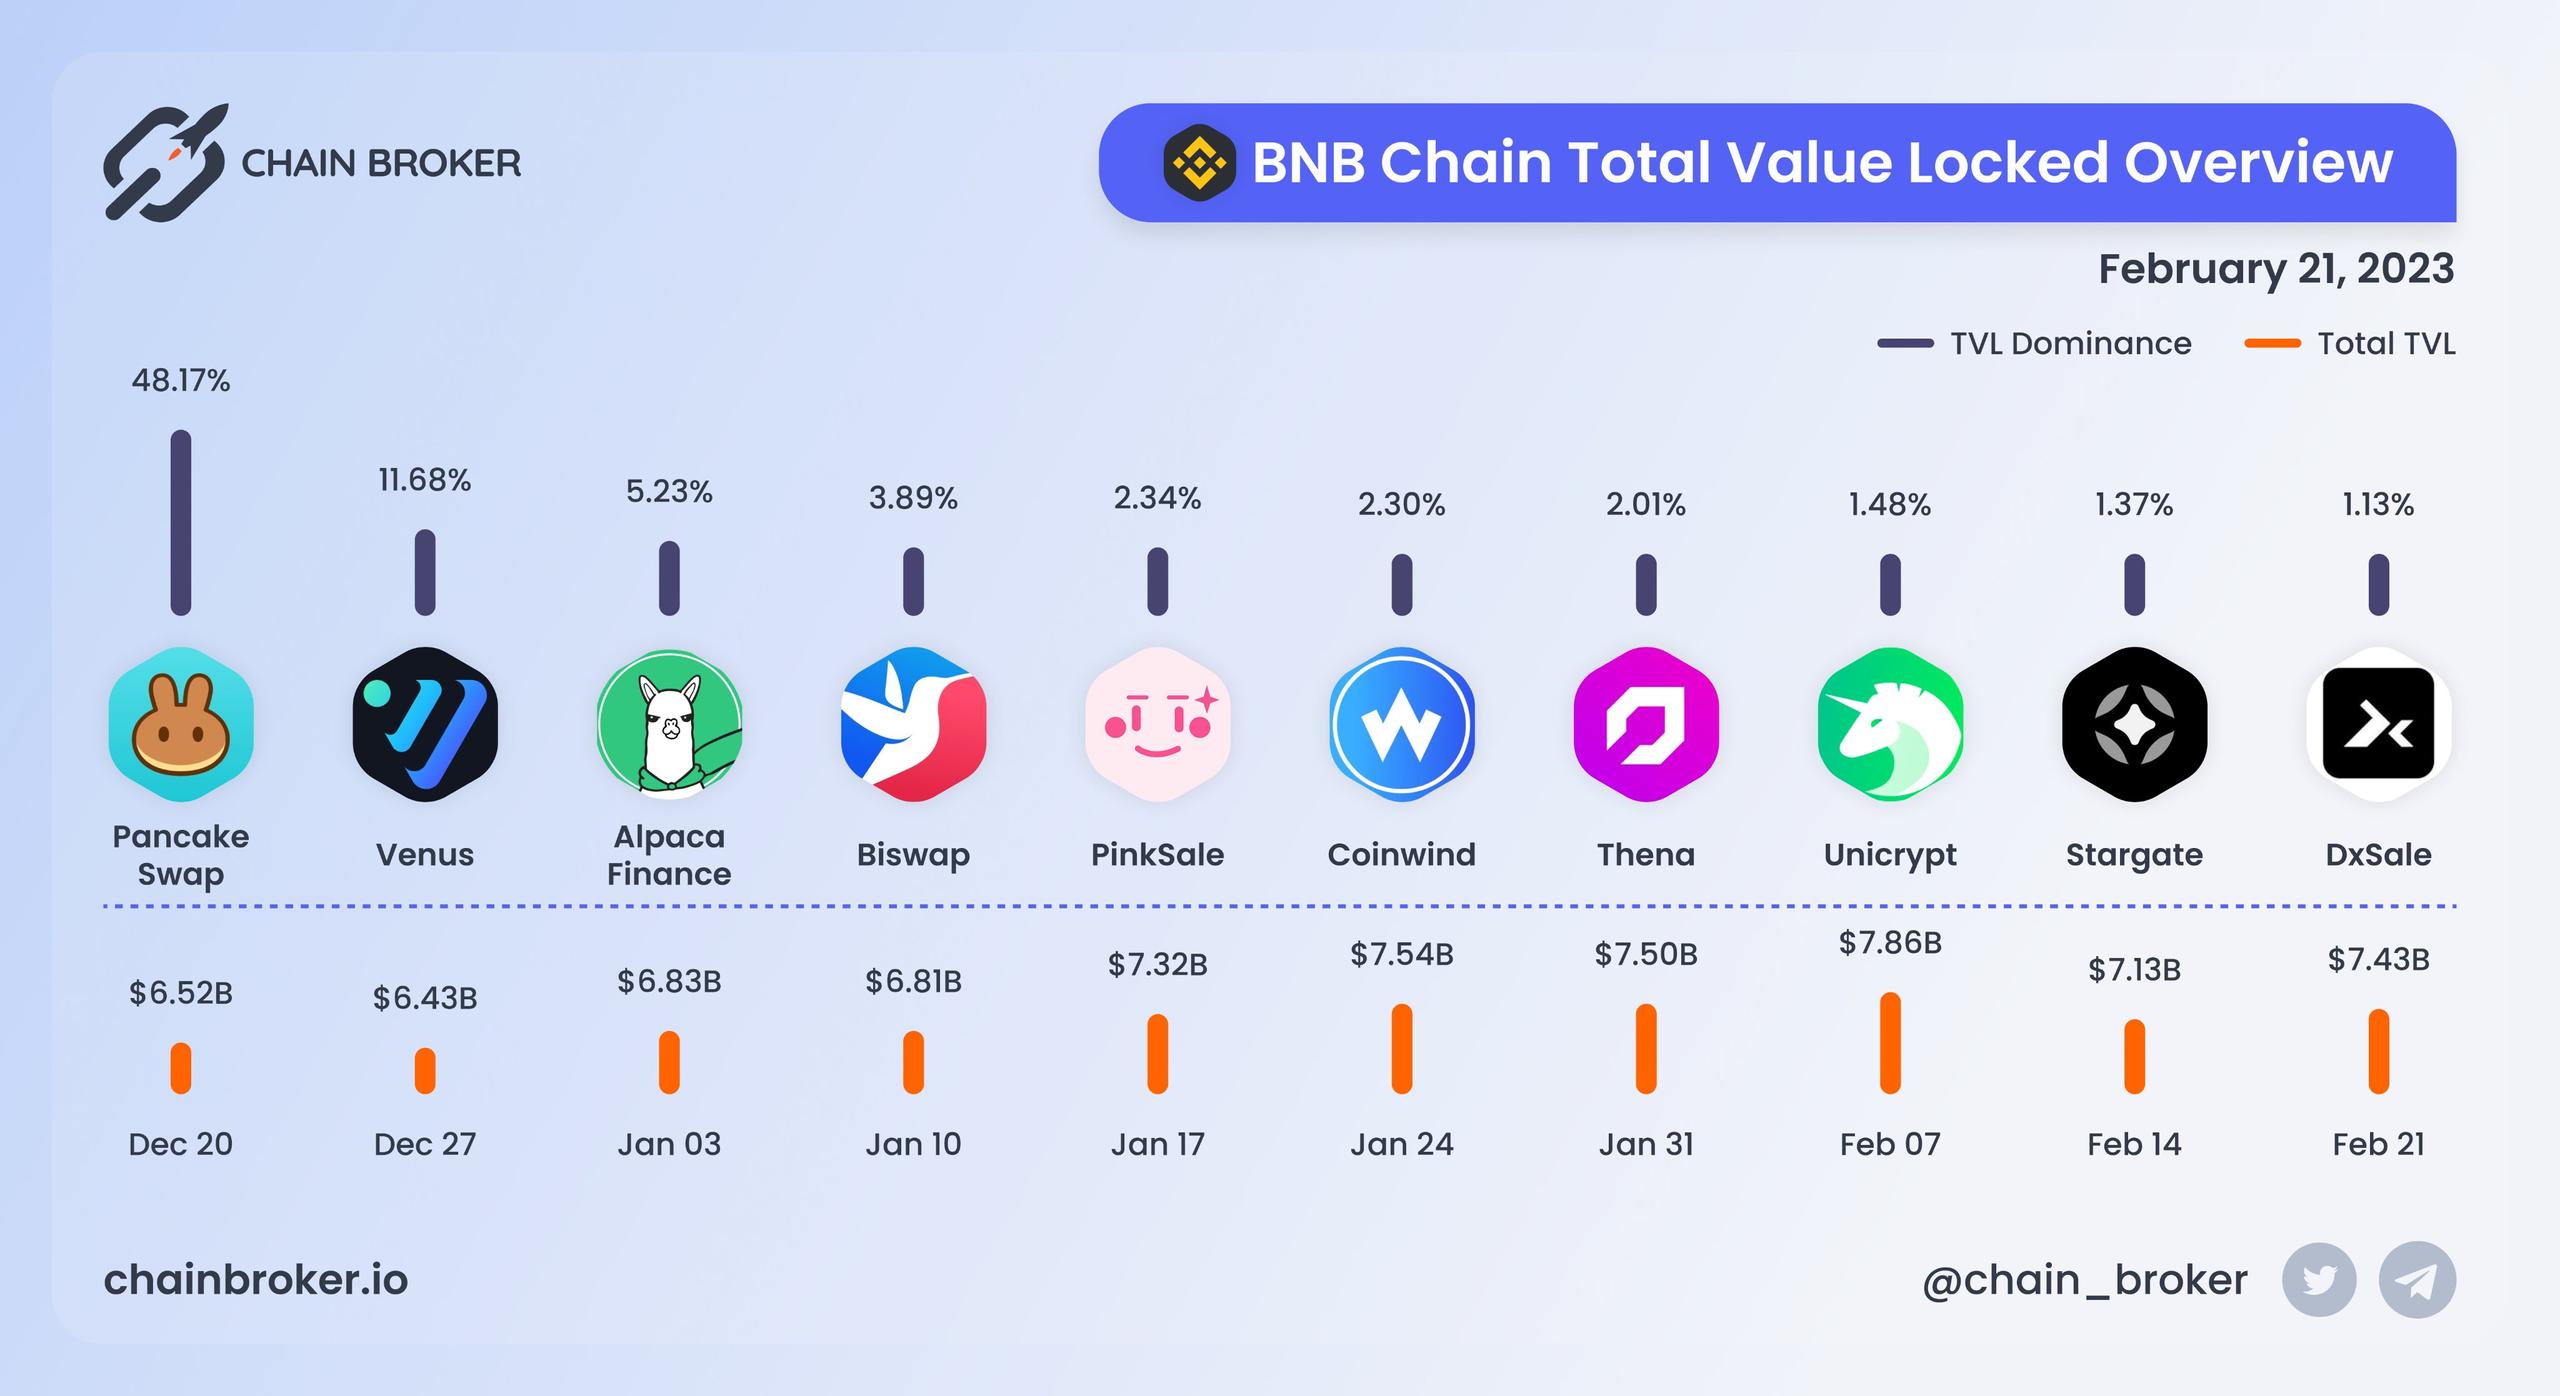 BNB Chain total value locked overview